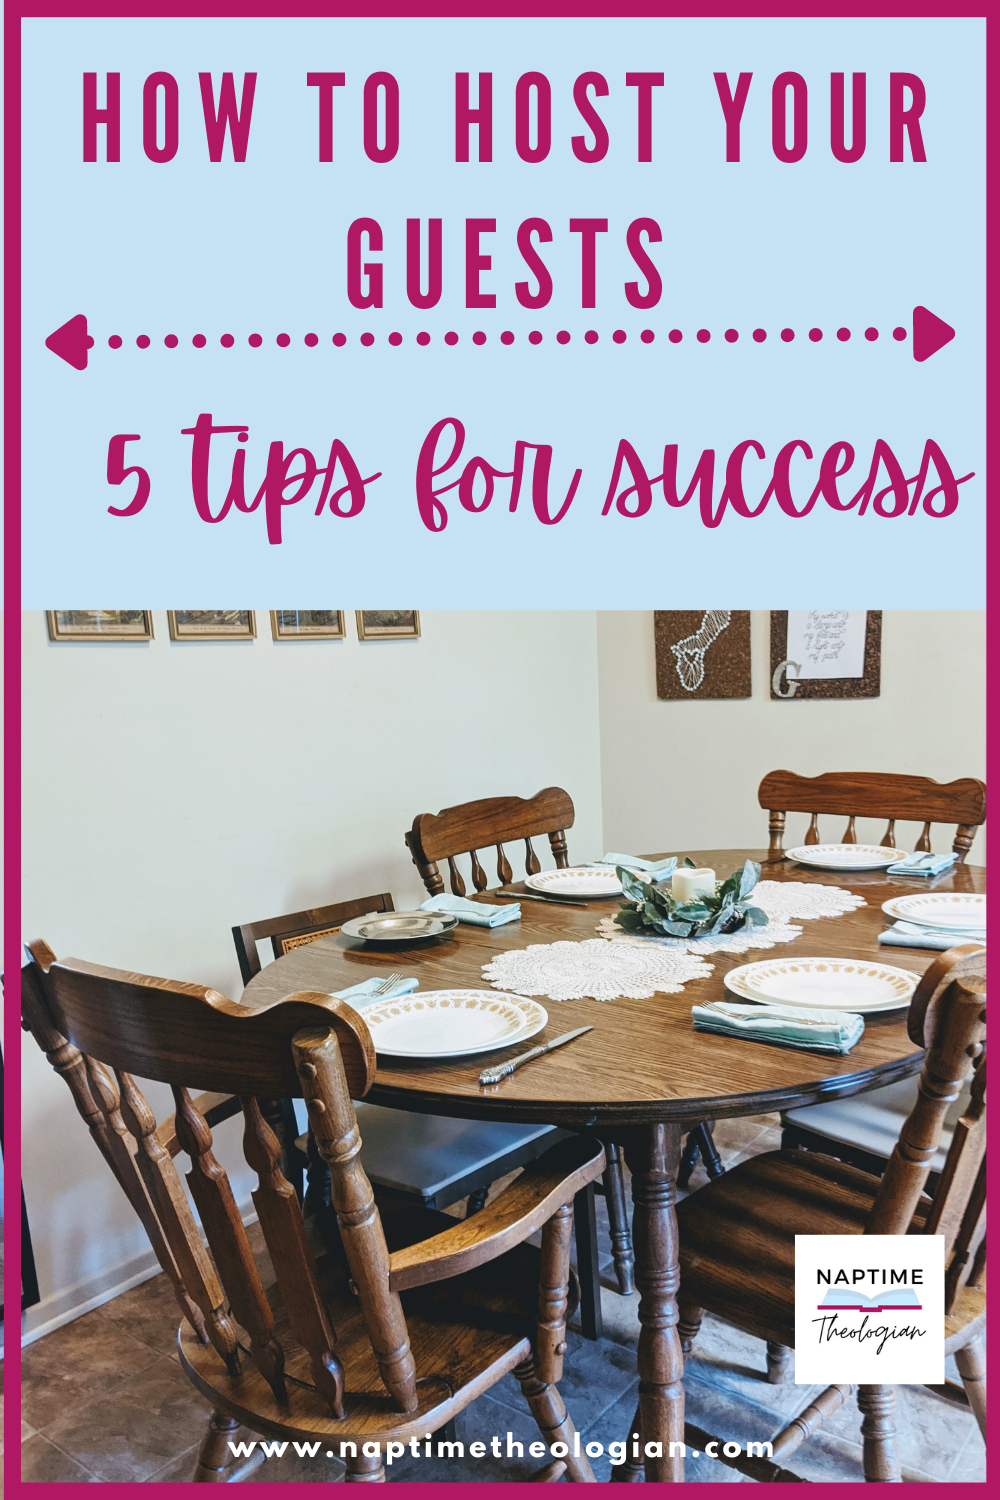 How to Host Well | 5 Hostess Tips